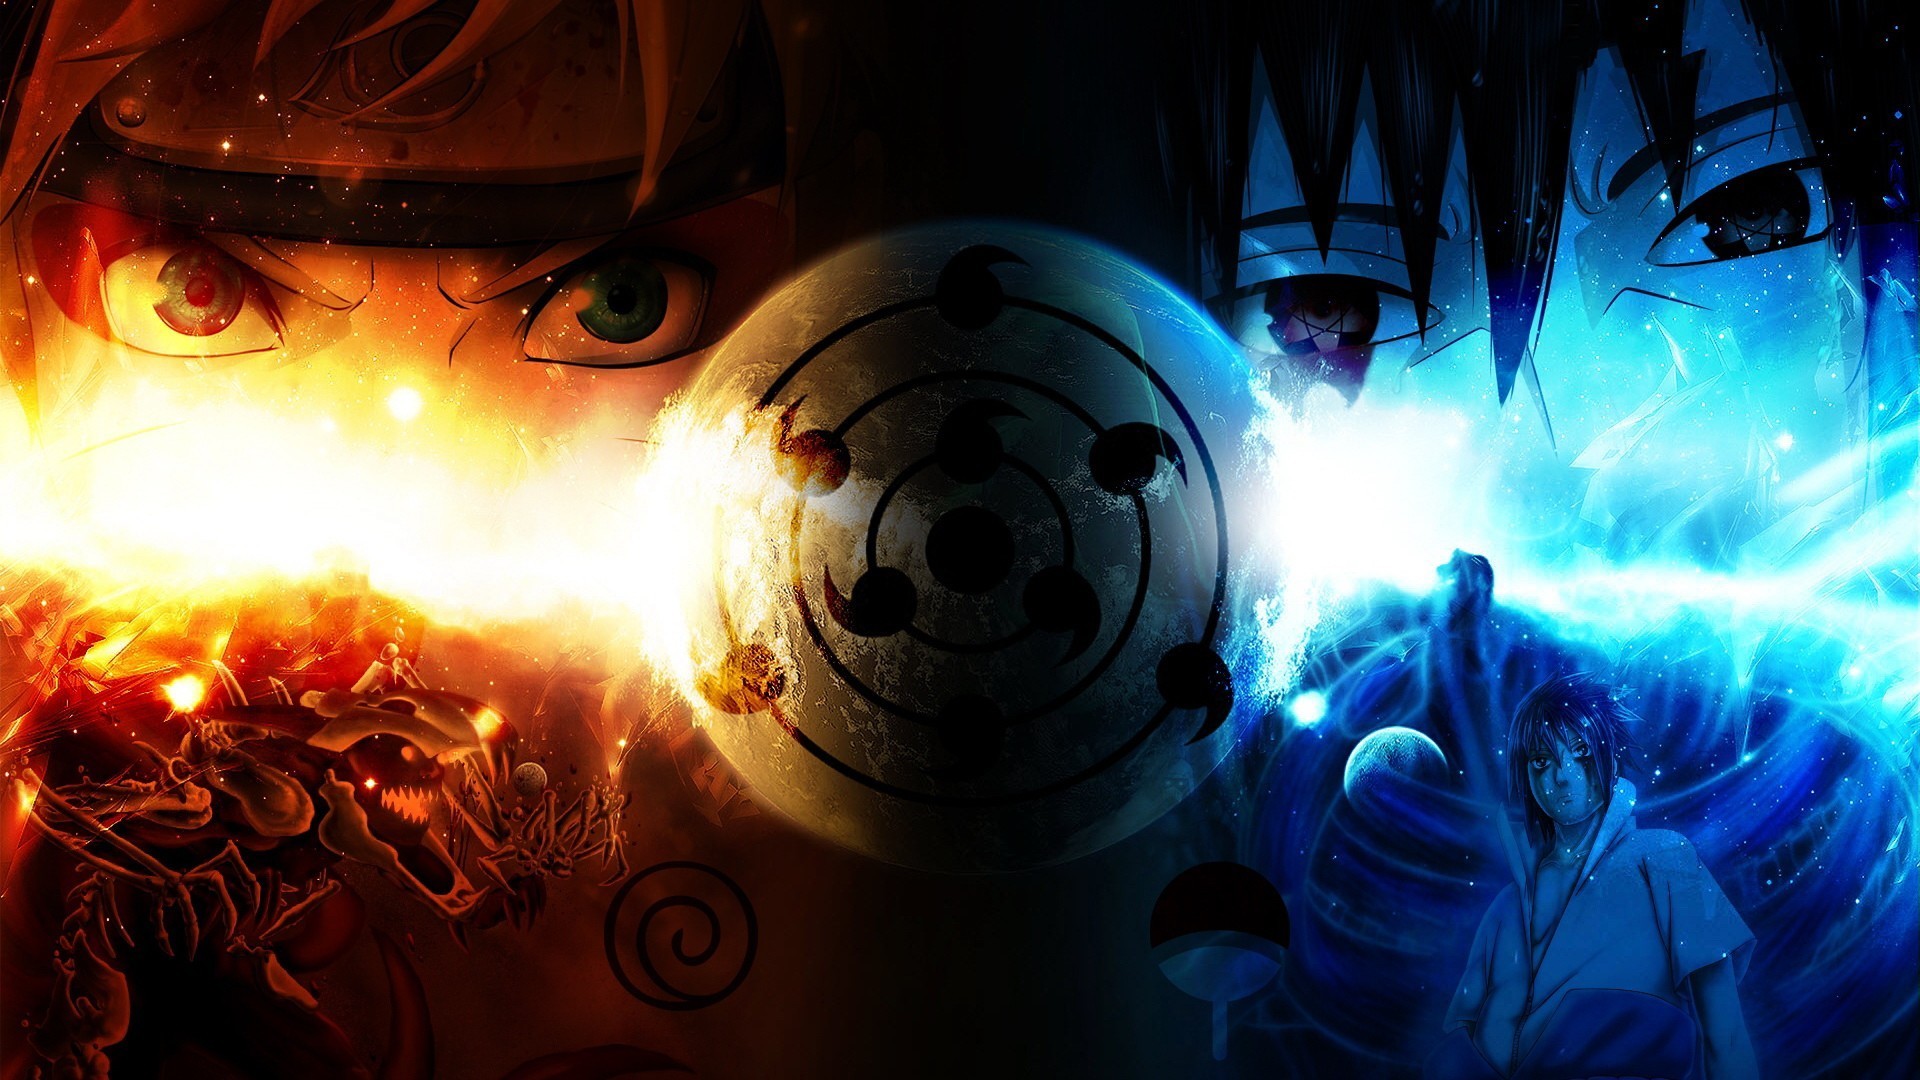 Cool Naruto Wallpaper - Cool Naruto Wallpapers HD ·① WallpaperTag : Naruto wallpapers for 4k, 1080p hd and 720p hd resolutions and are best suited for desktops no cool naruto 4k wallpaper on page 3 either?